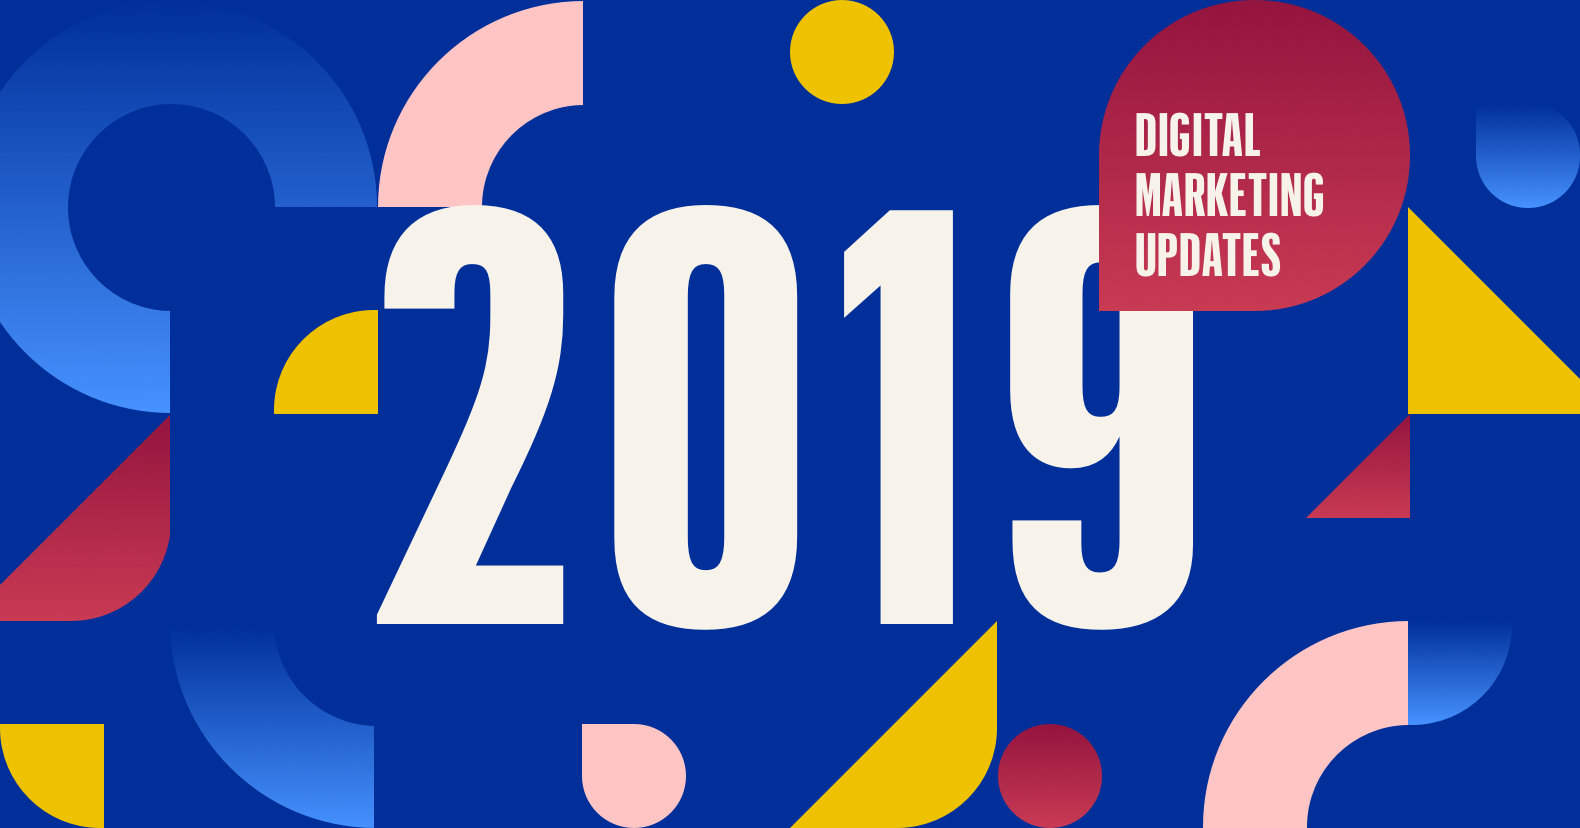 5 Digital Marketing Updates That Will Seriously Shake Things Up In 2019